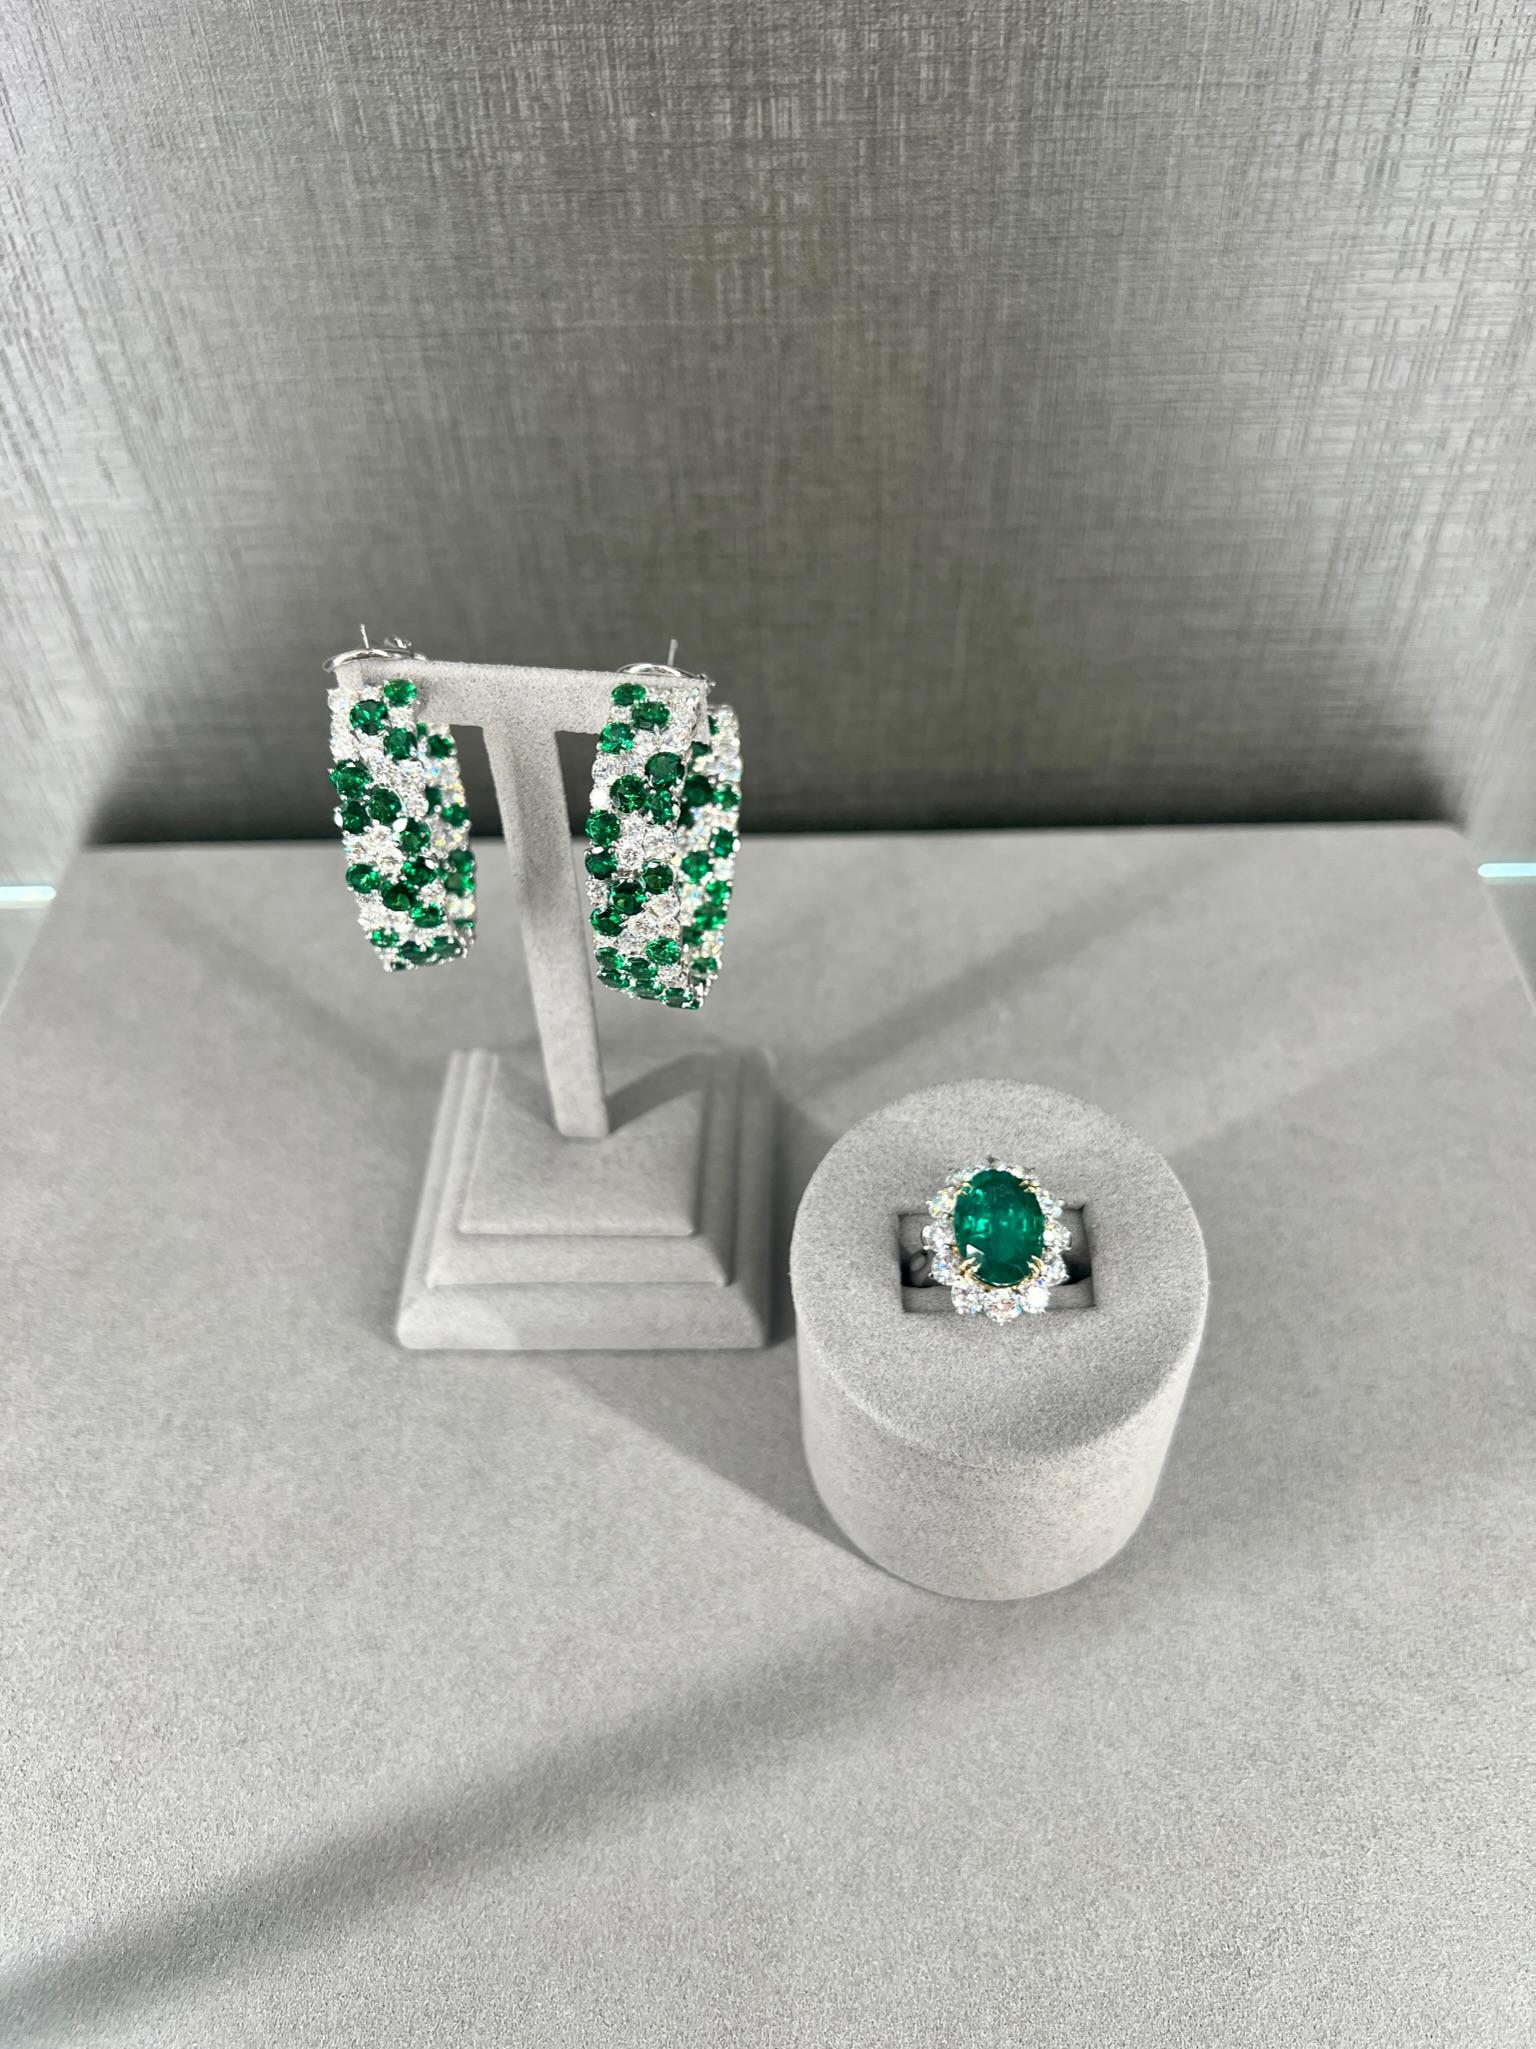 Tsavorite and diamond hoops are a beautiful and unique style of earrings that can add a pop of color and sparkle to any outfit. Tsavorite is a type of garnet that is known for its bright green color, and when paired with diamonds, it creates a